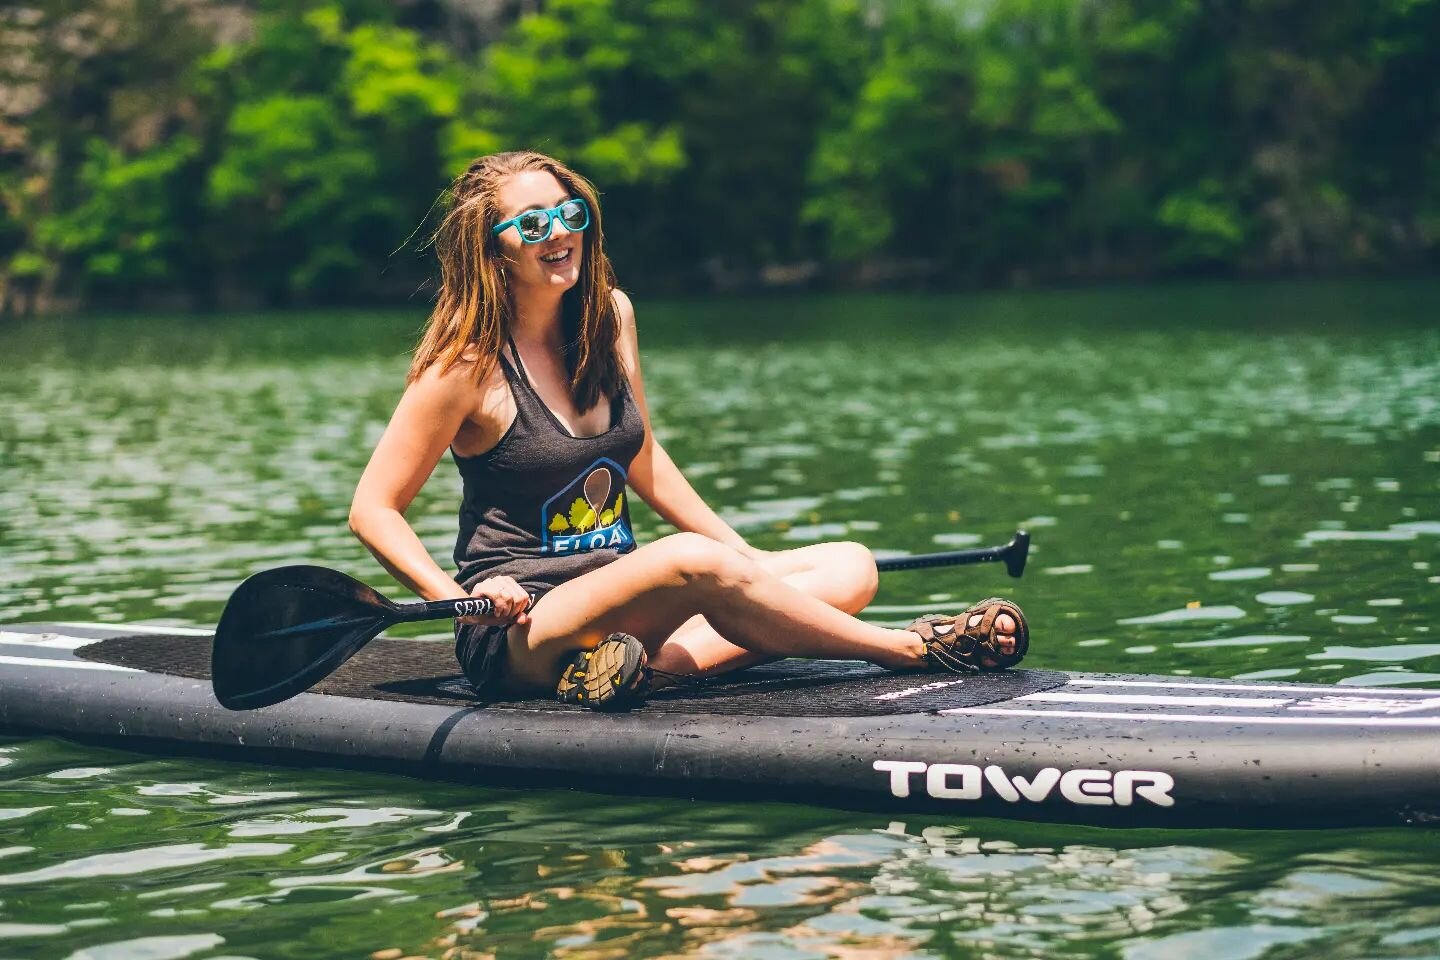 It's hot! There's still time to get on the water on a stand up paddle board this weekend! Book your board at floateurekasprings.com! 

#eurekaspringsarkansas #eurekaspringsar #arkansas #visitarkansas #findingnwa #visitnorthwestarkansas